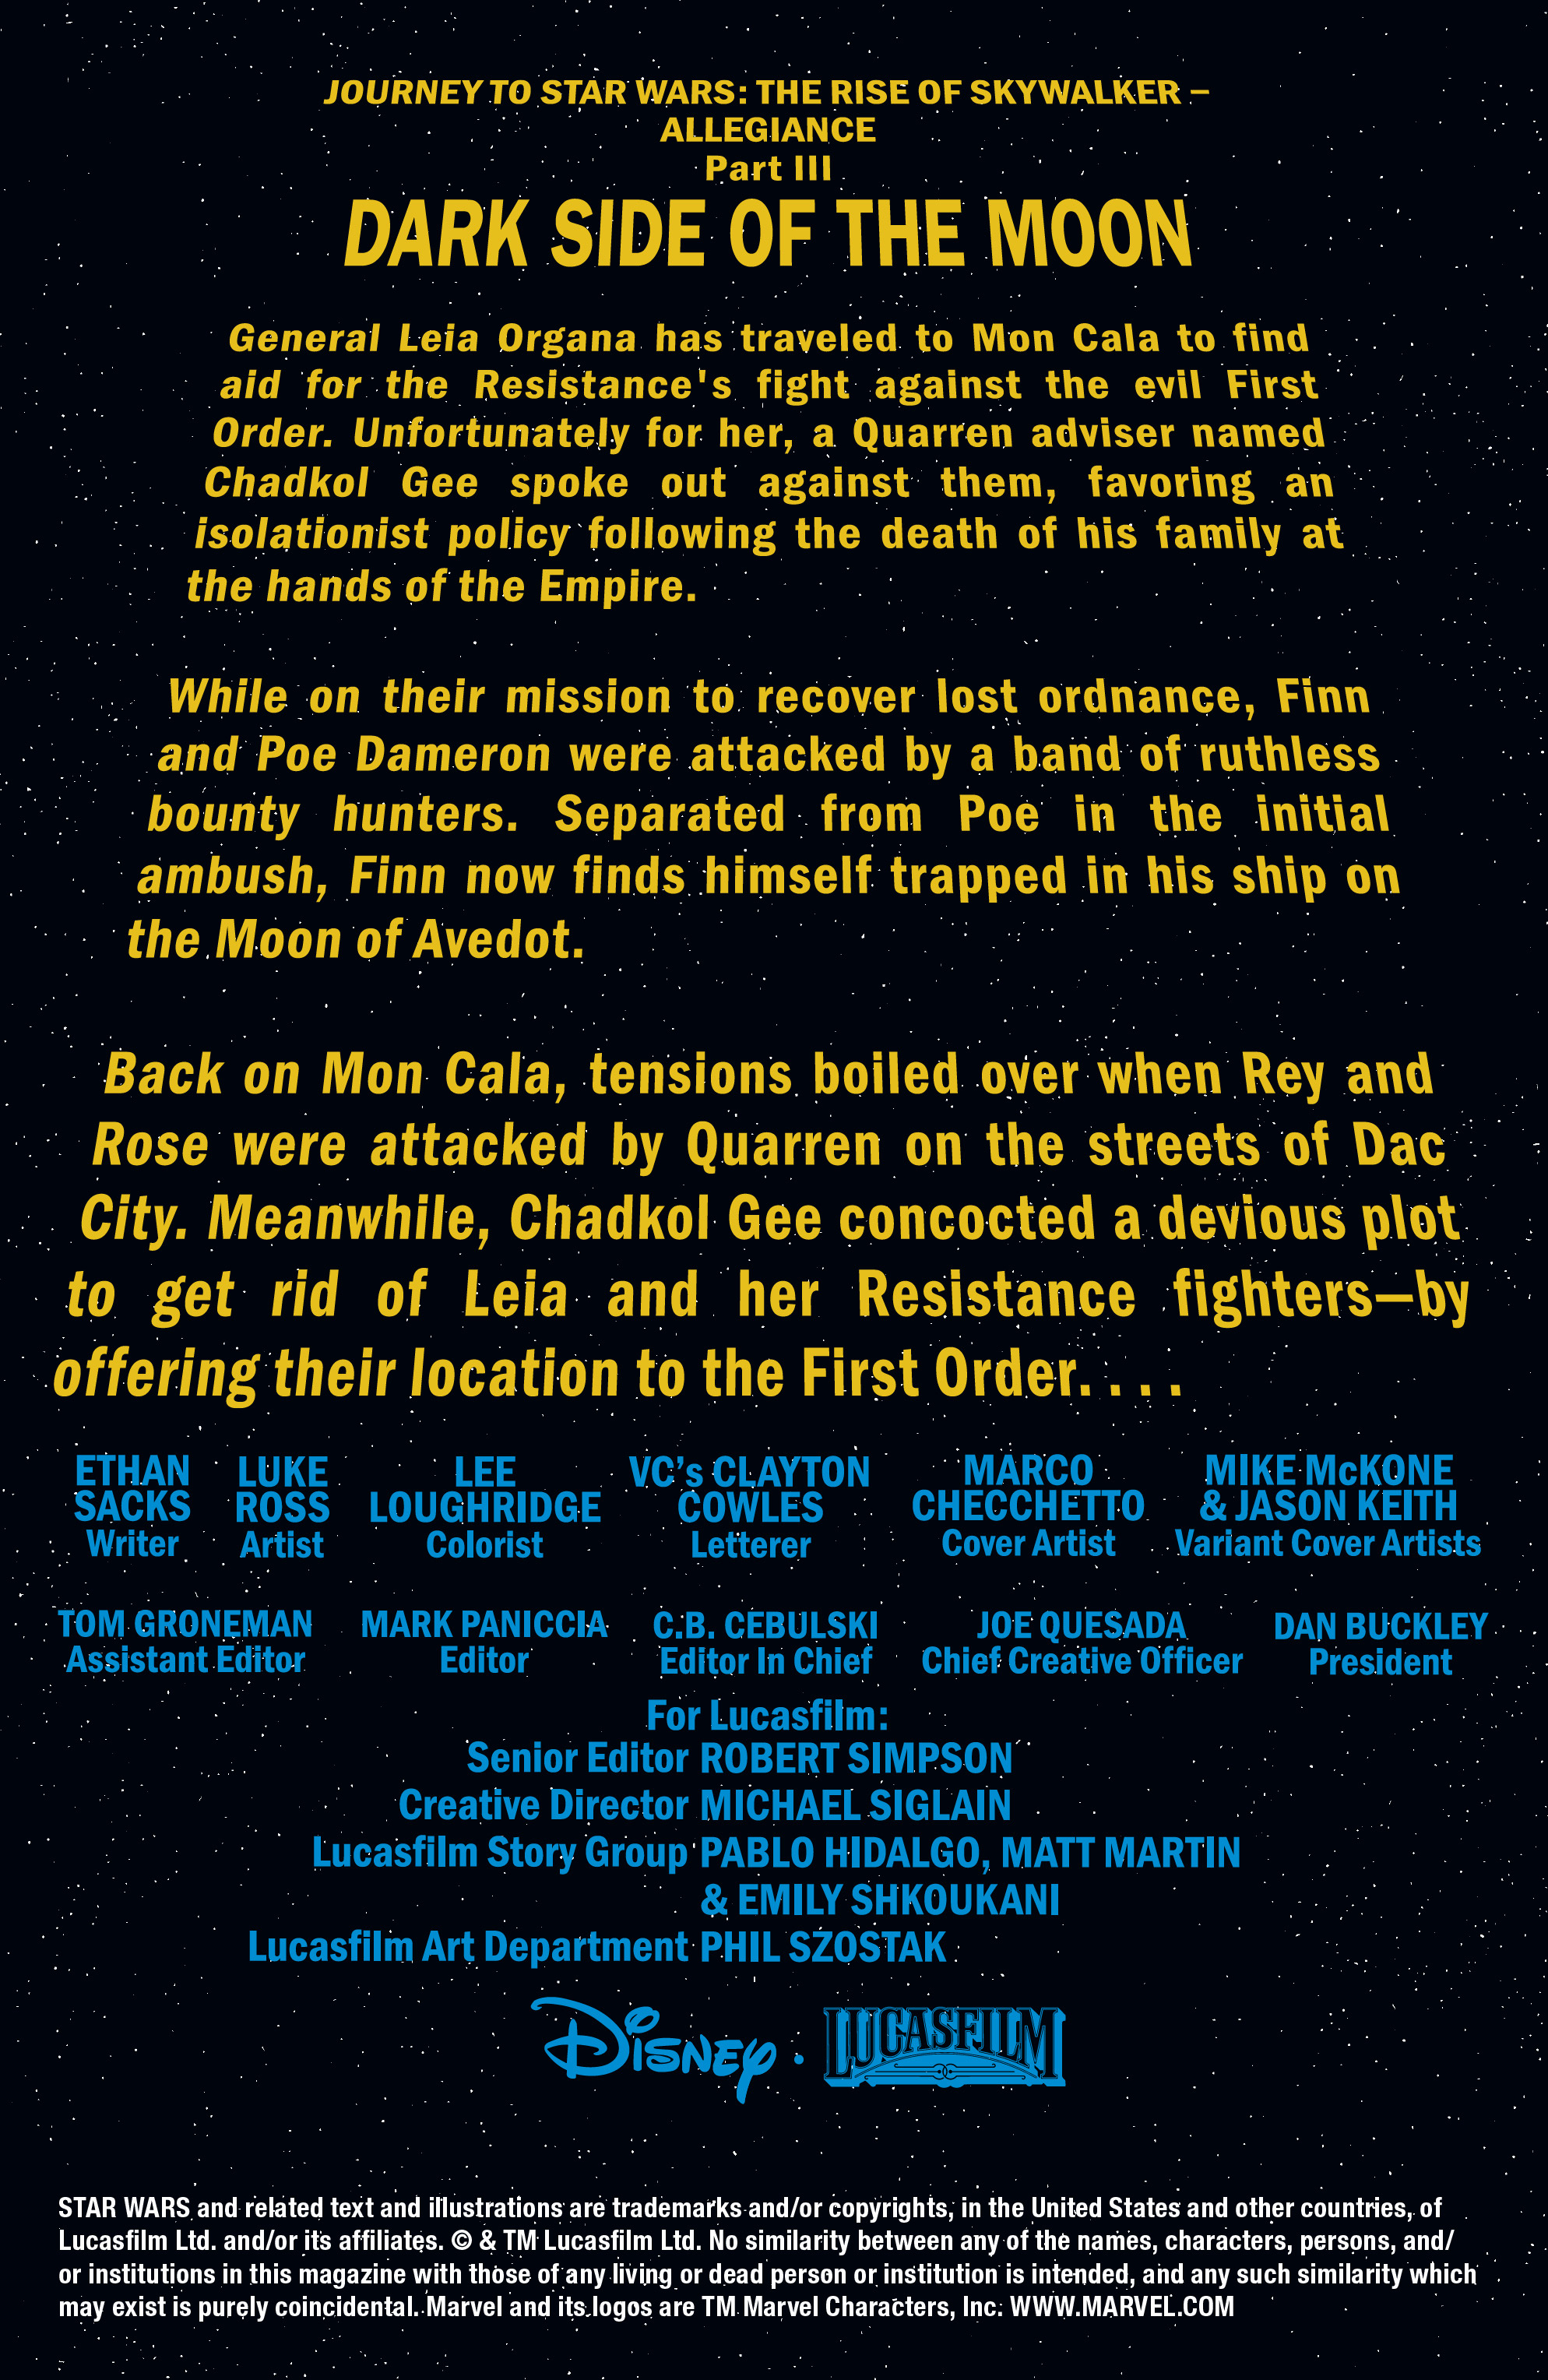 Journey To Star Wars: The Rise Of Skywalker - Allegiance (2019): Chapter 3 - Page 2